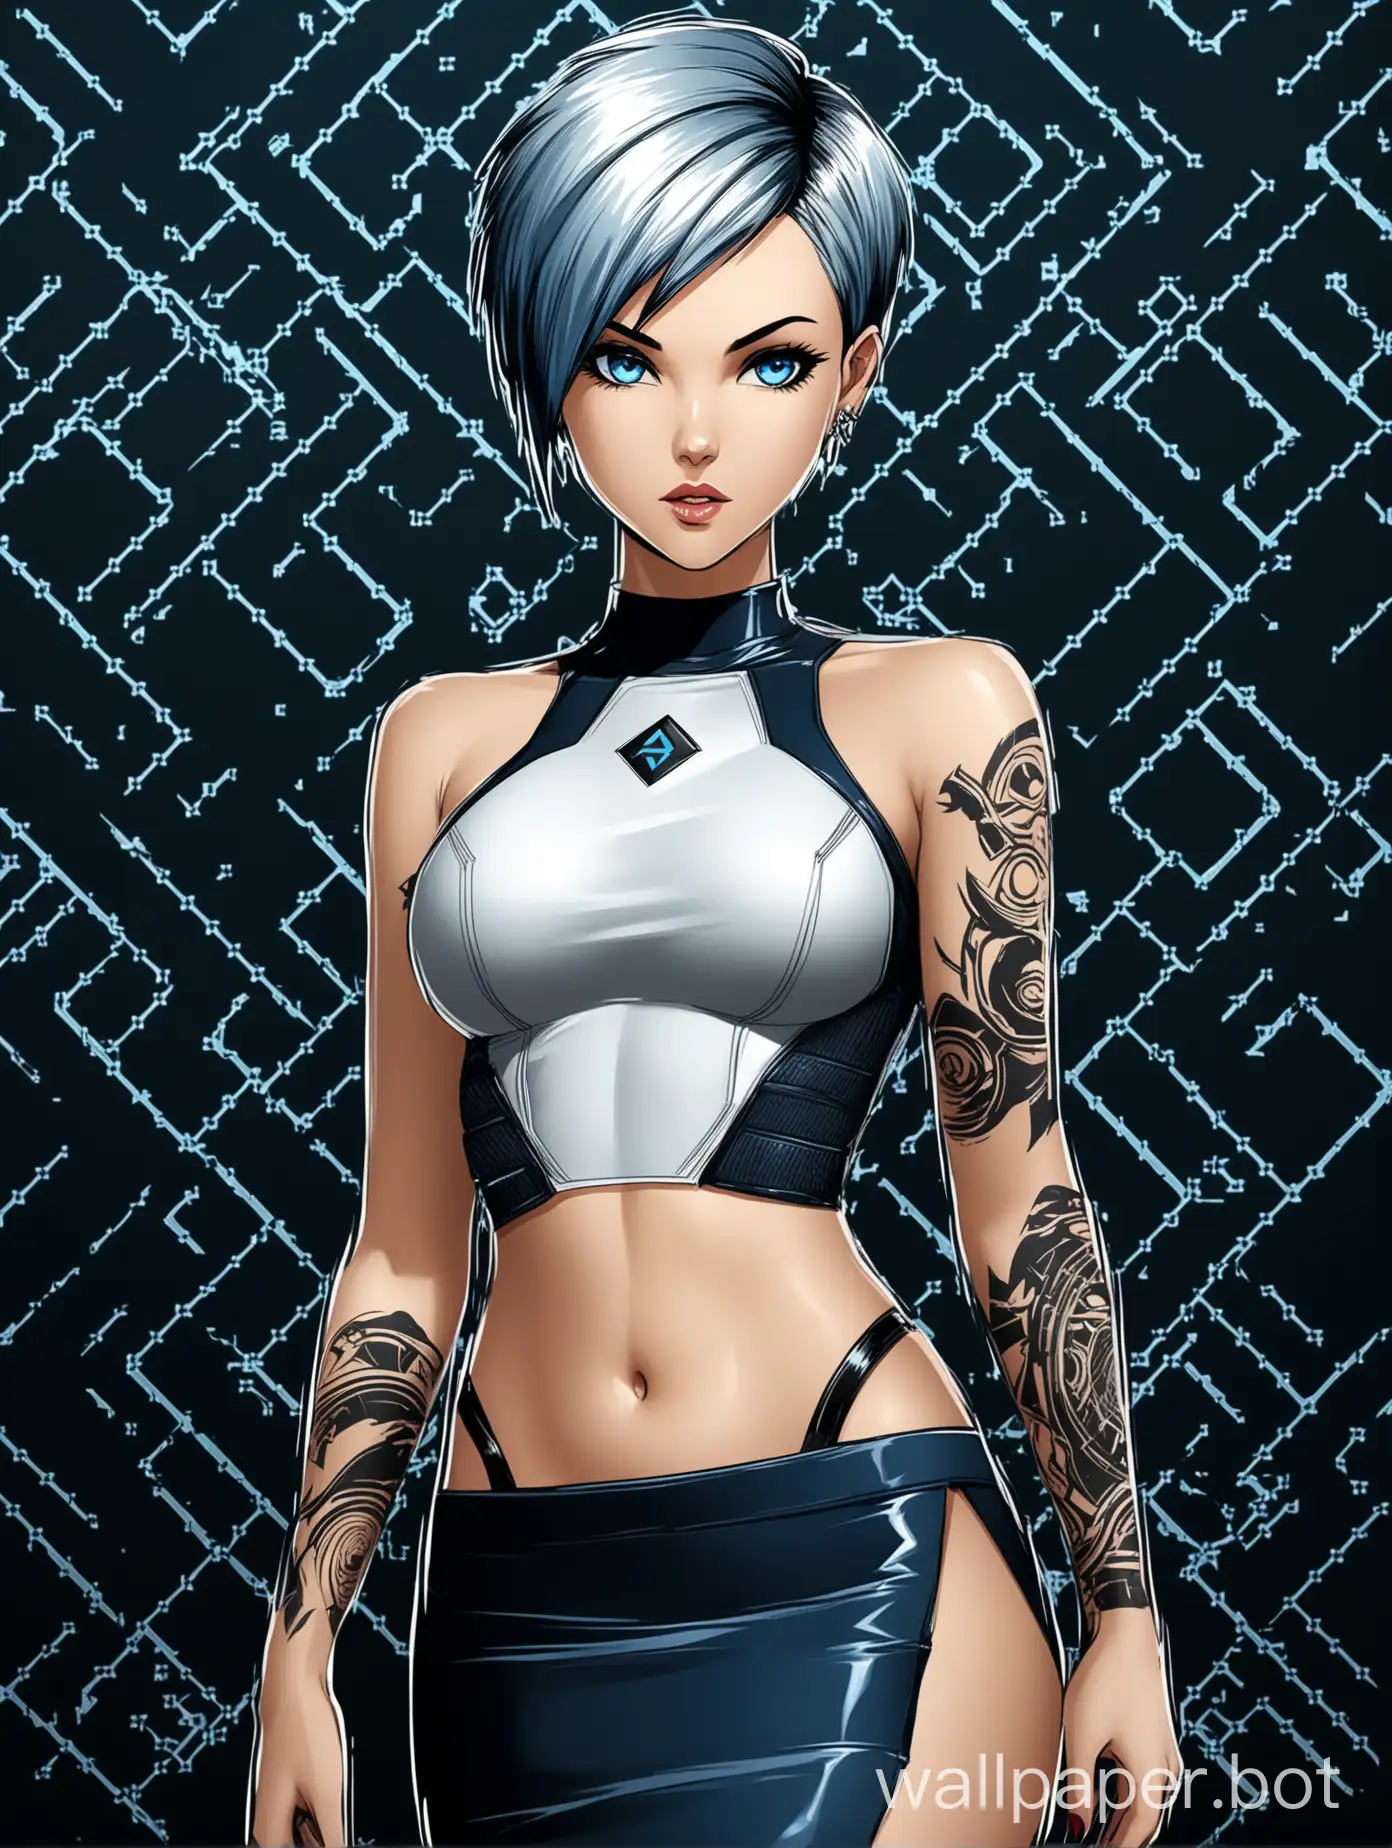 Design a captivating wallpaper featuring a sultry anime female character with a short blue hairstyle similar to Ruby Rose's character in 'XXX Return of Xander Cage'.Her blue short hairstyle should be vibrant and electric The character should exude confidence and charisma, with a seductive yet edgy look that reflects her personality. Her silver short hairstyle should be sleek and modern, adding to her bold and dynamic appearance. Dress her in a fitted  crop top that accentuates her curvy physique, paired with a sleek bodycon skirt that hugs her figure. Enhance her sexiness with subtle yet alluring poses and expressions. Incorporate elements of Arch Linux, such as the logo or color scheme, into the background or accessories to give the wallpaper a tech-inspired edge. The background should be monochromatic, clean, and mineralistic, with subtle textures to add depth and interest while maintaining a minimalist aesthetic